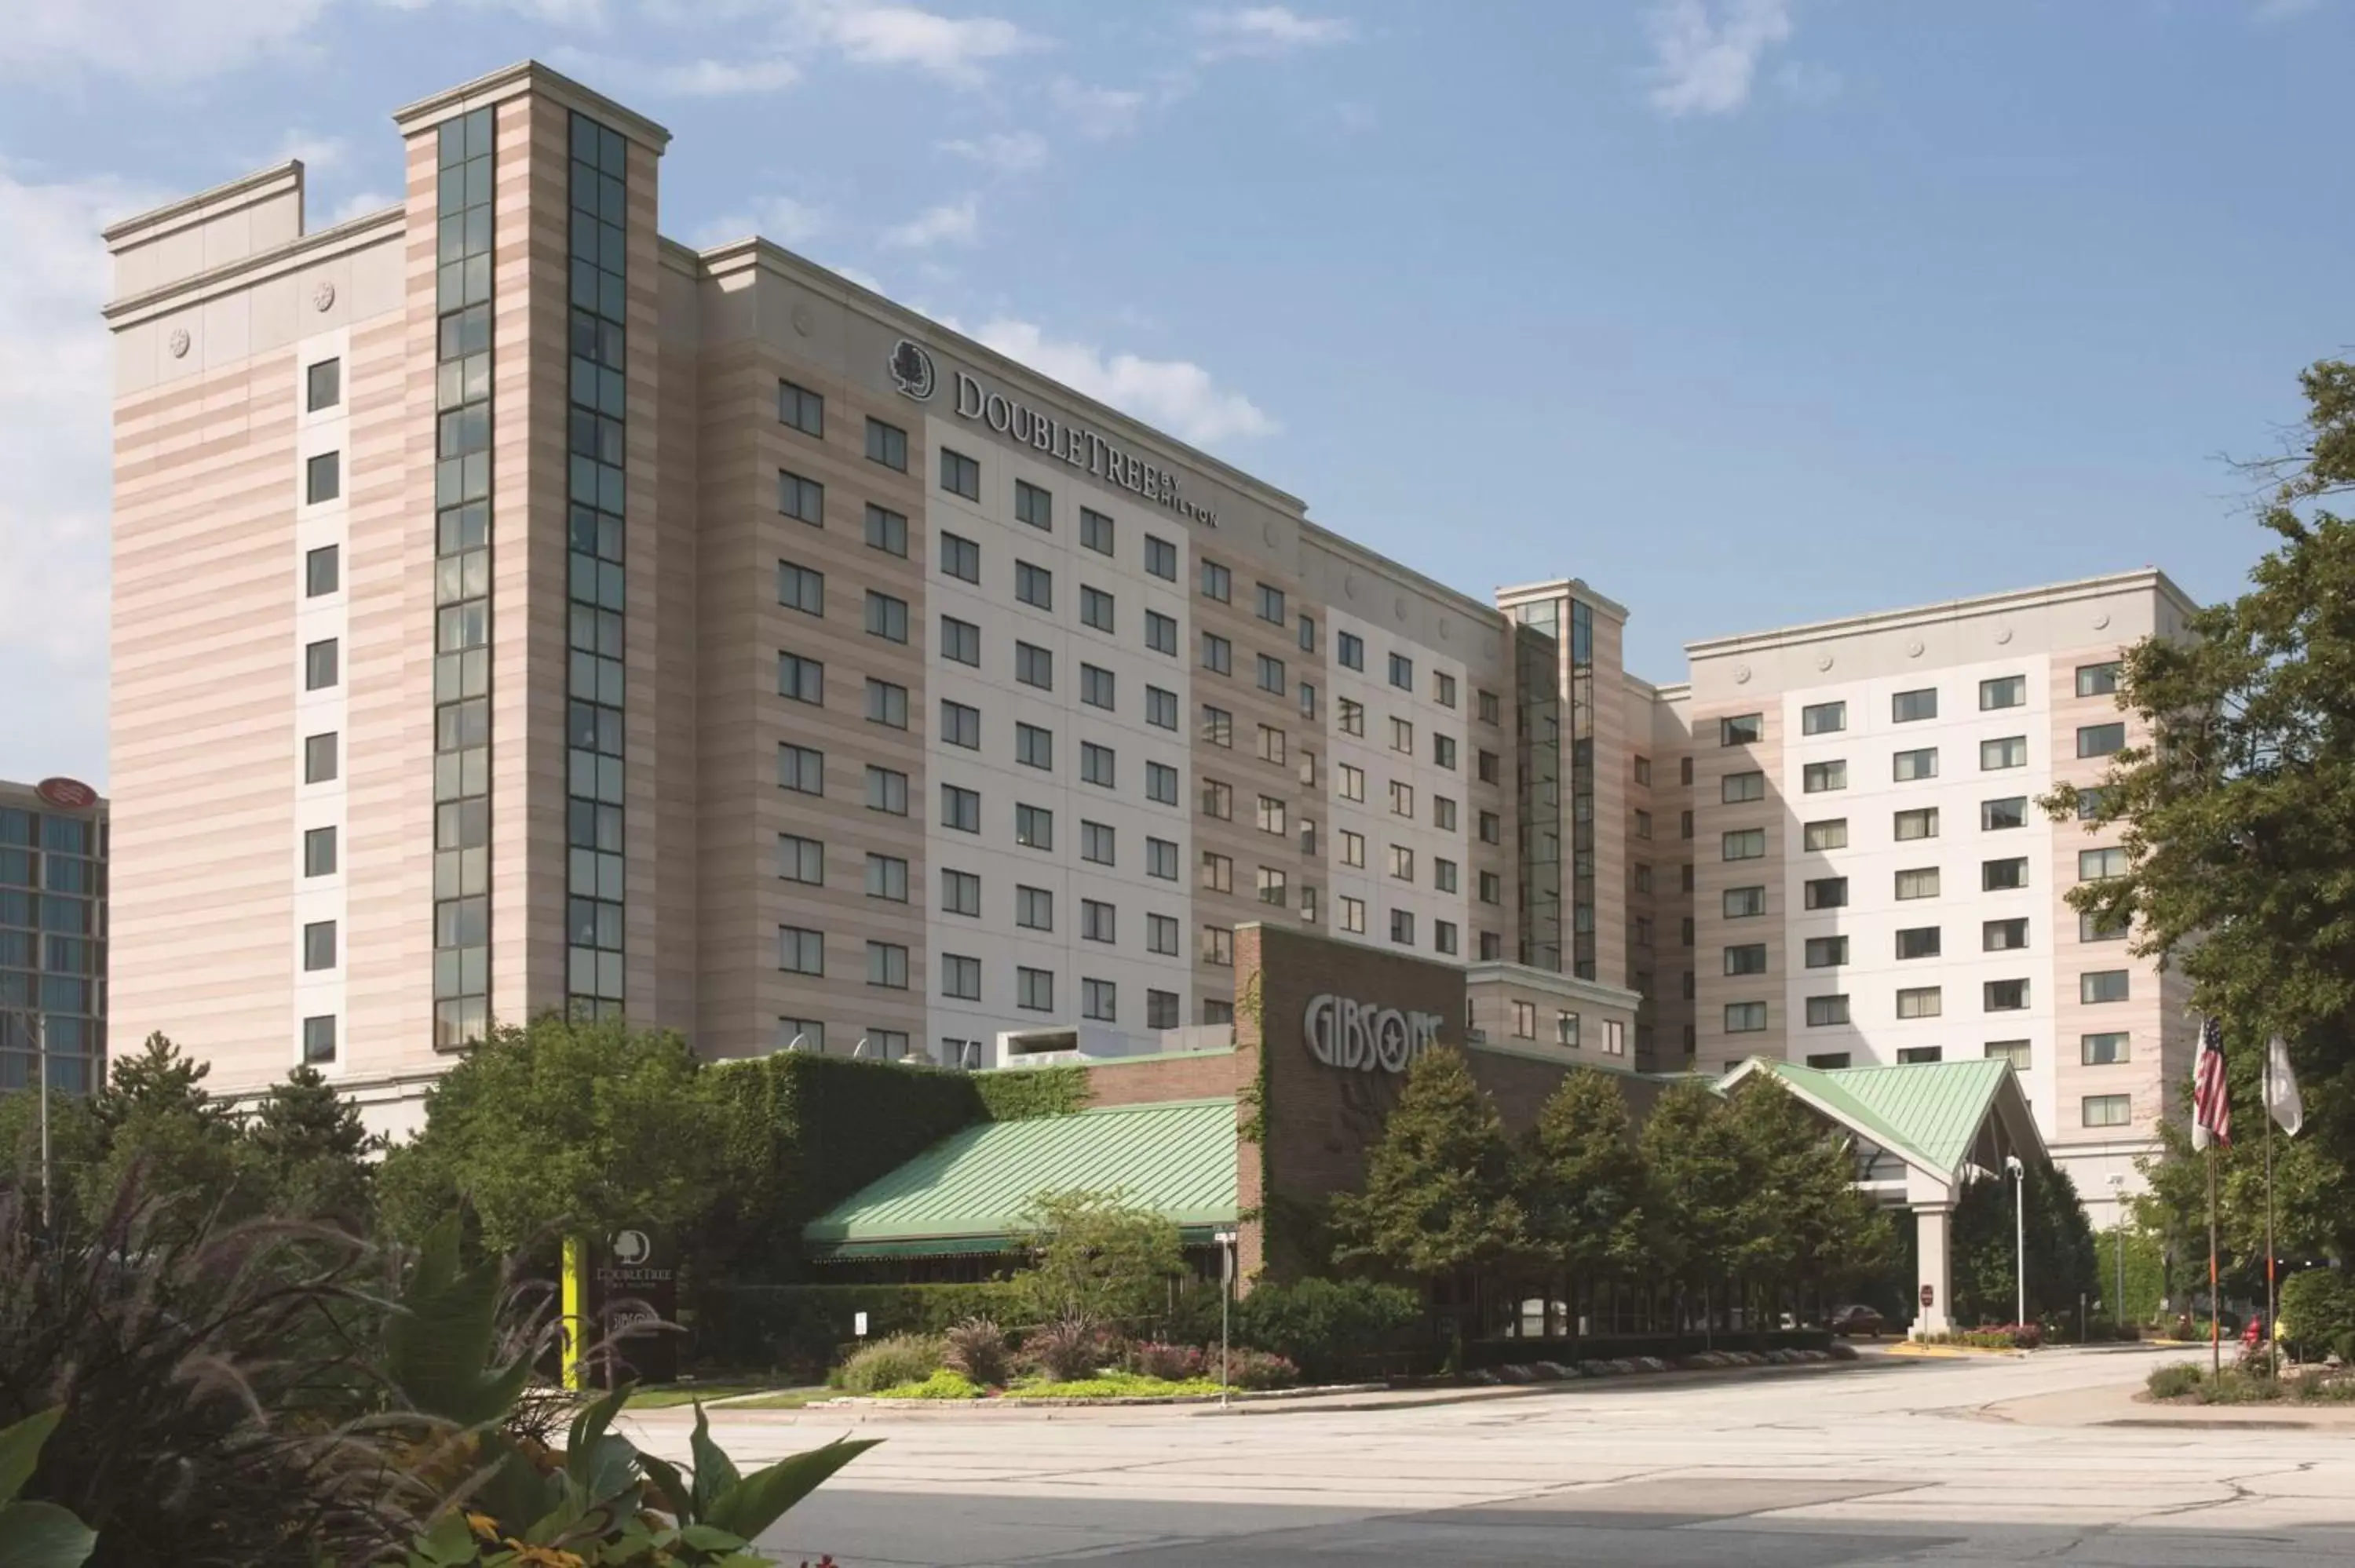 Property Building in DoubleTree by Hilton Chicago O'Hare Airport-Rosemont